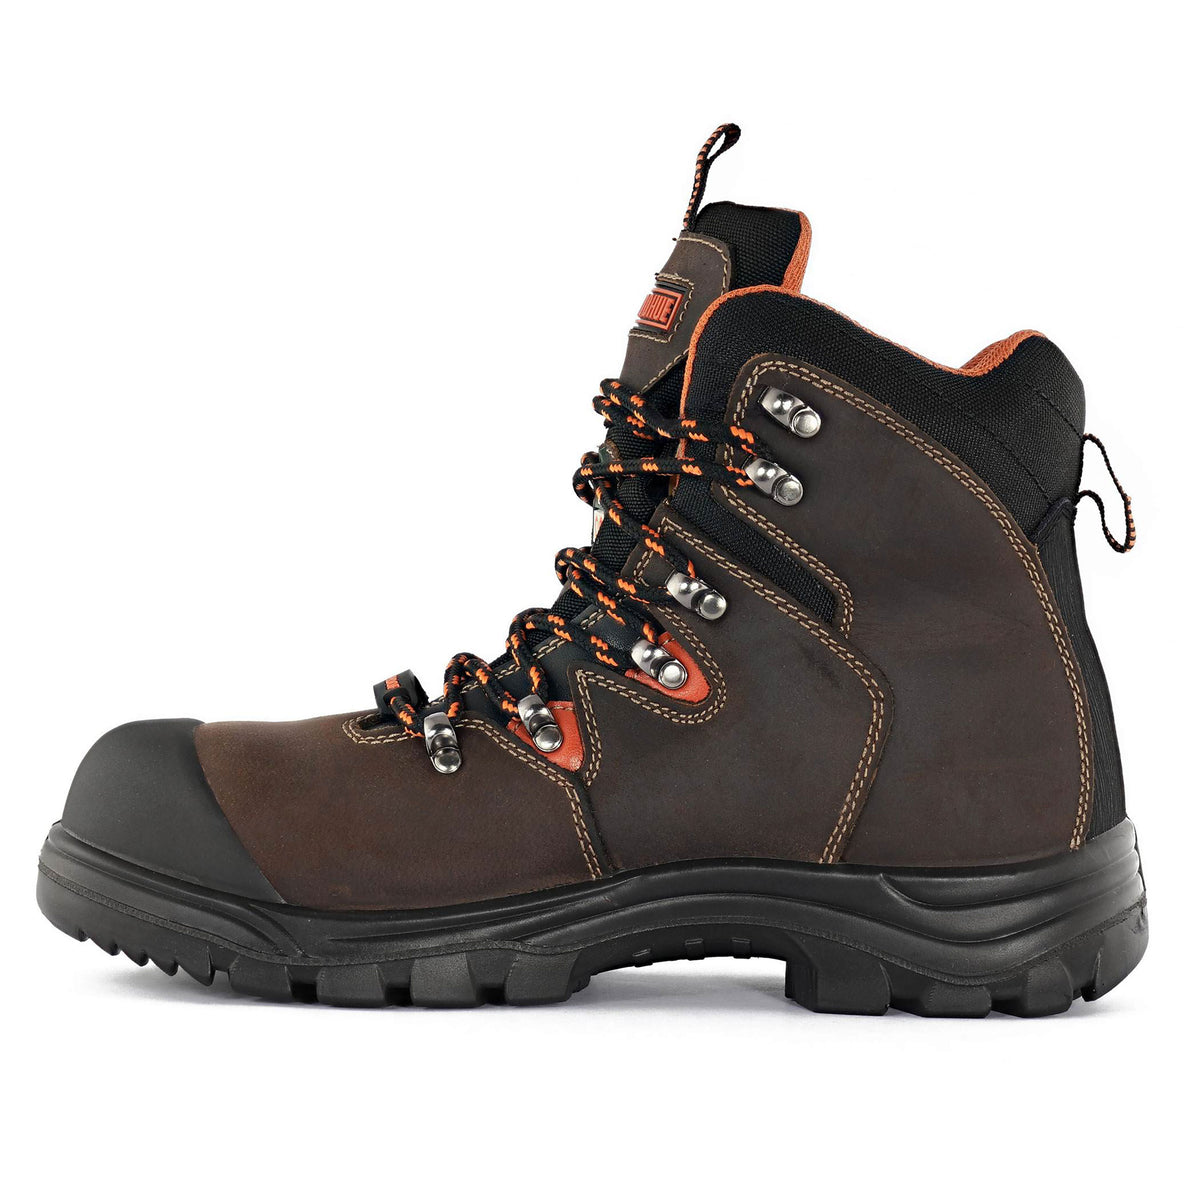 Jb Goodhue Adrenaline3 30906 Brown Shoes